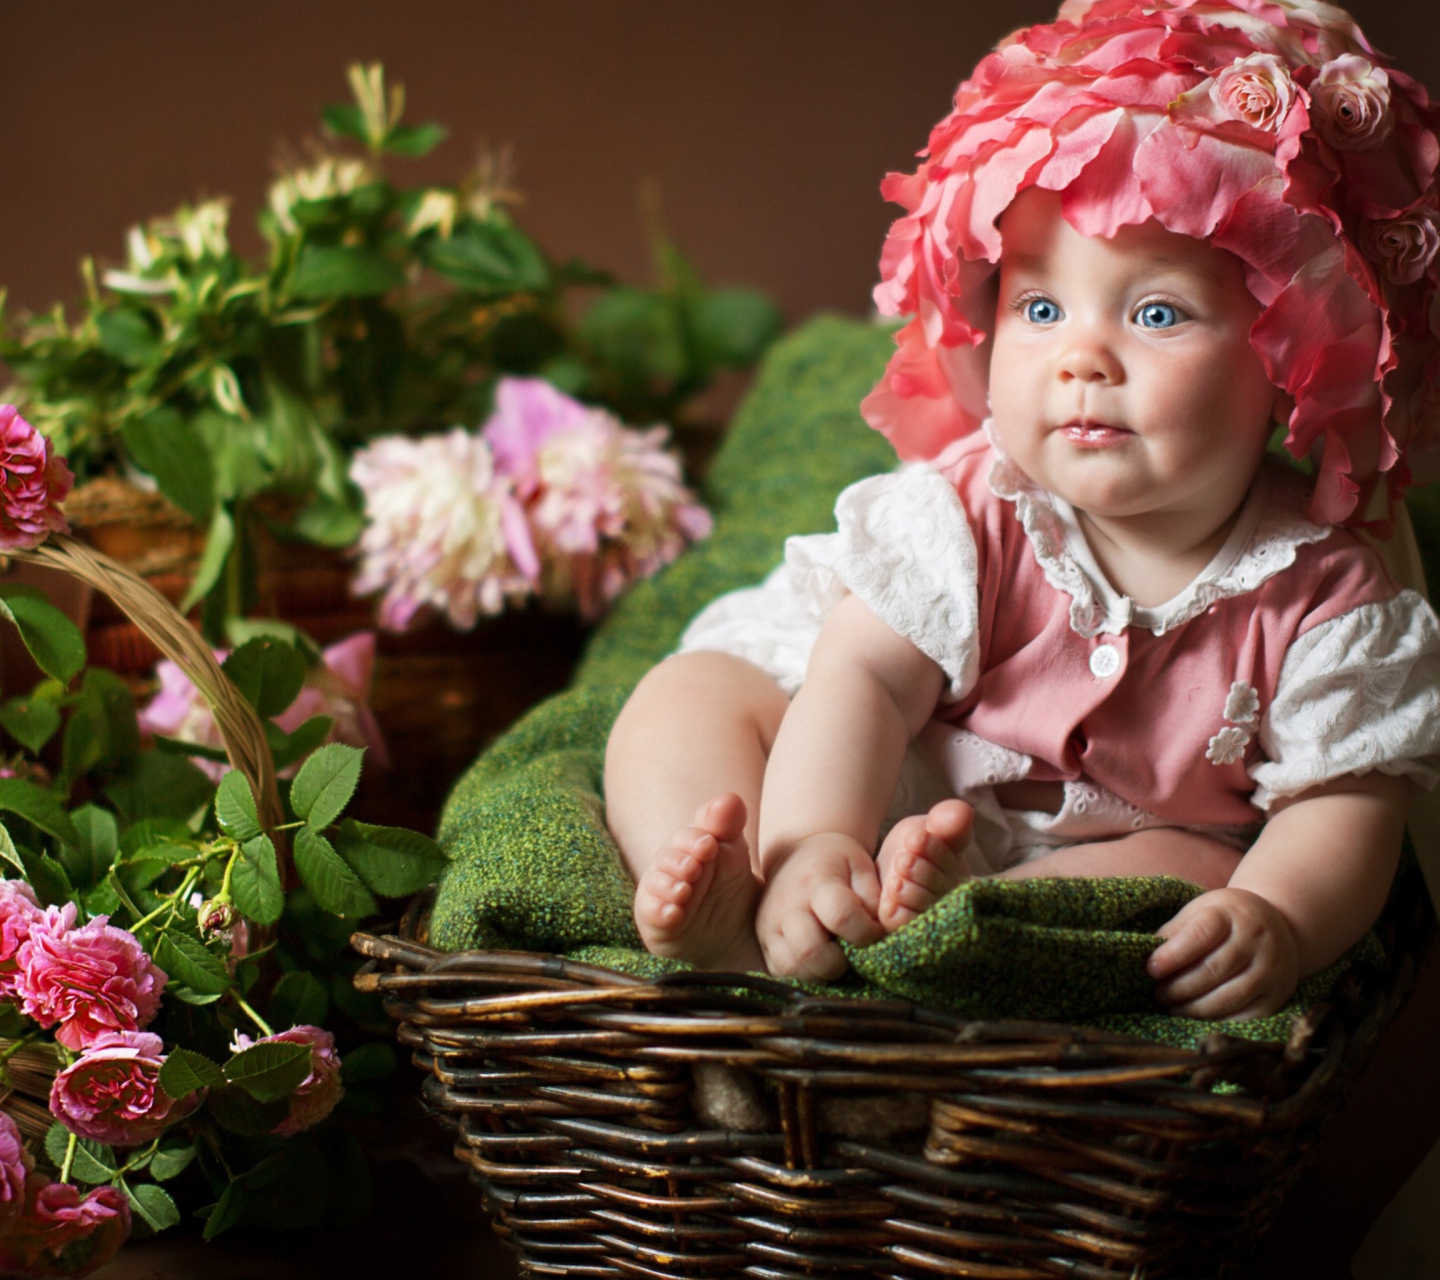 Cute Baby With Blue Eyes And Roses screenshot #1 1440x1280